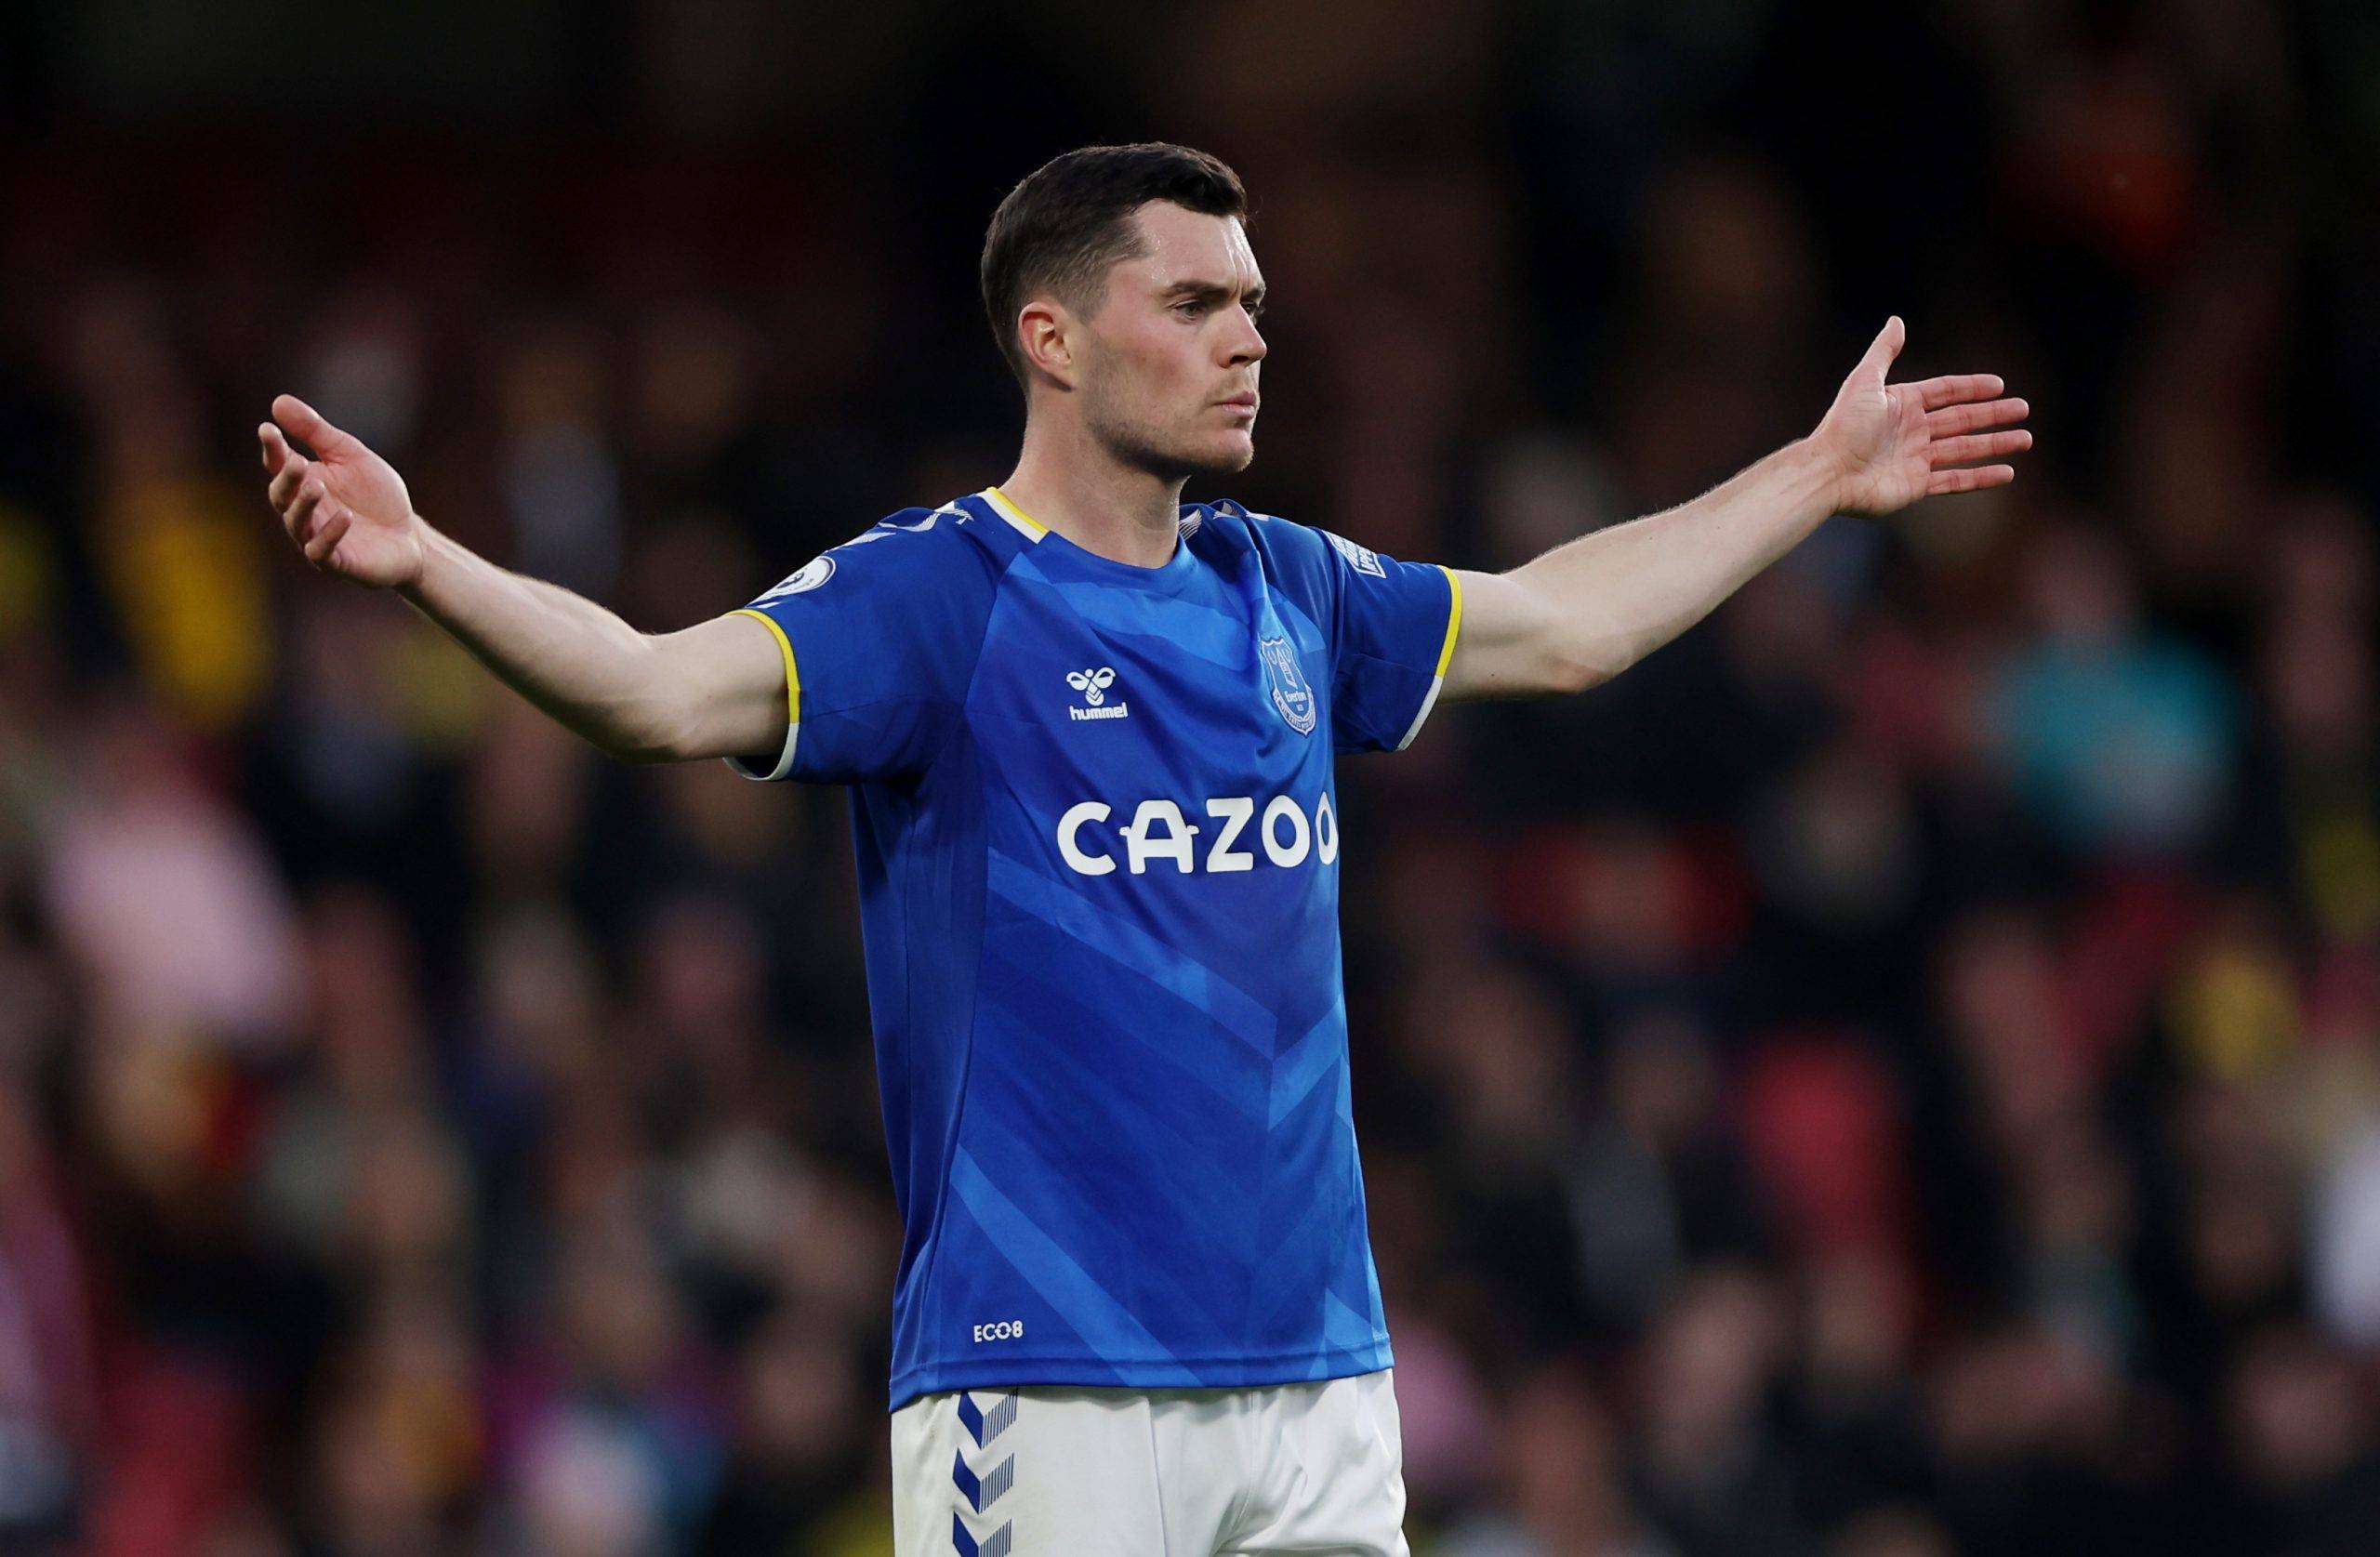 Everton: Toffees have 'knocked back' loan approach for Michael Keane - Everton News